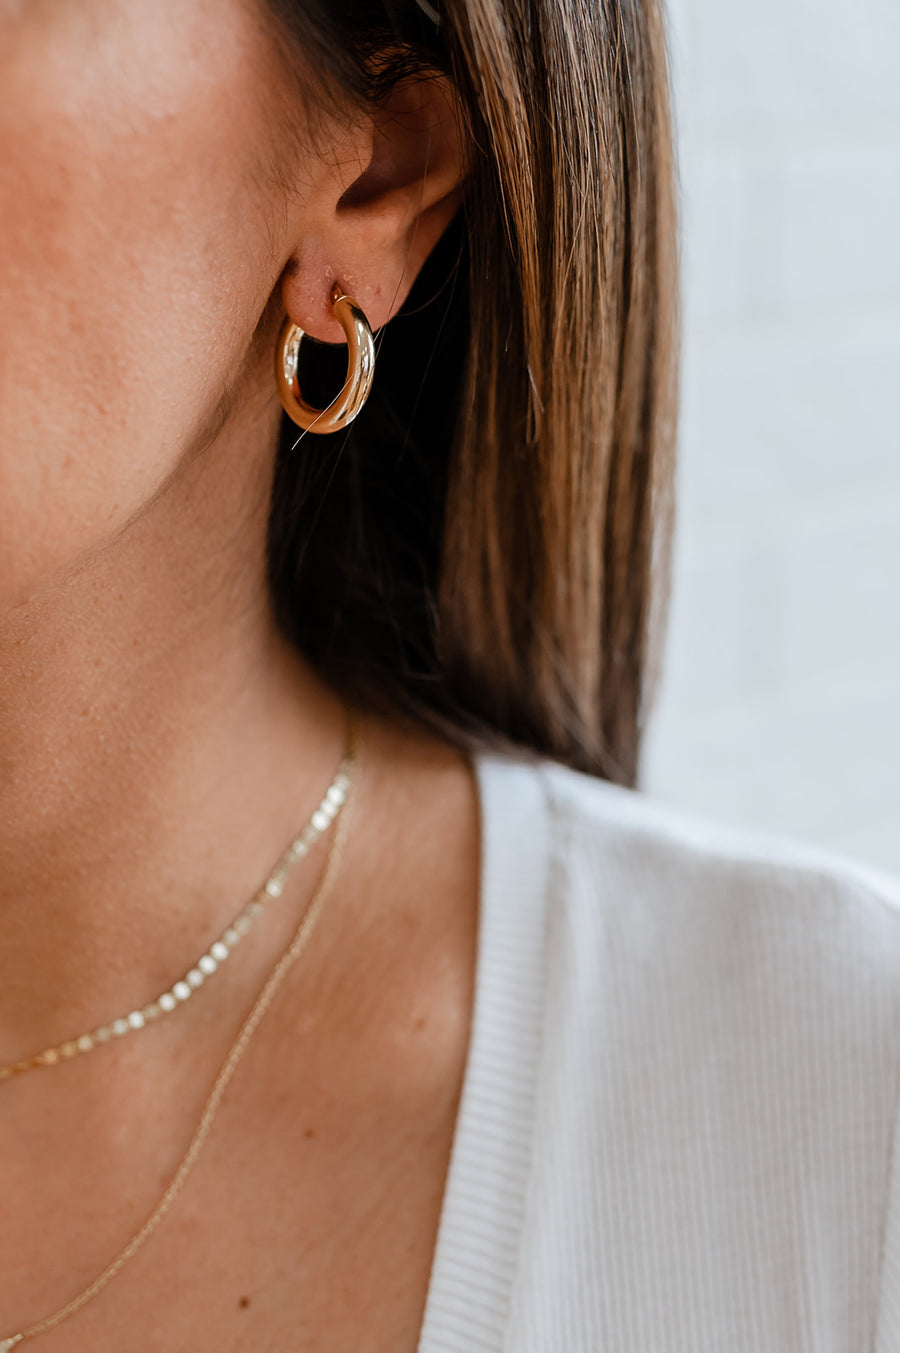 Thick Hoops | 10k Gold